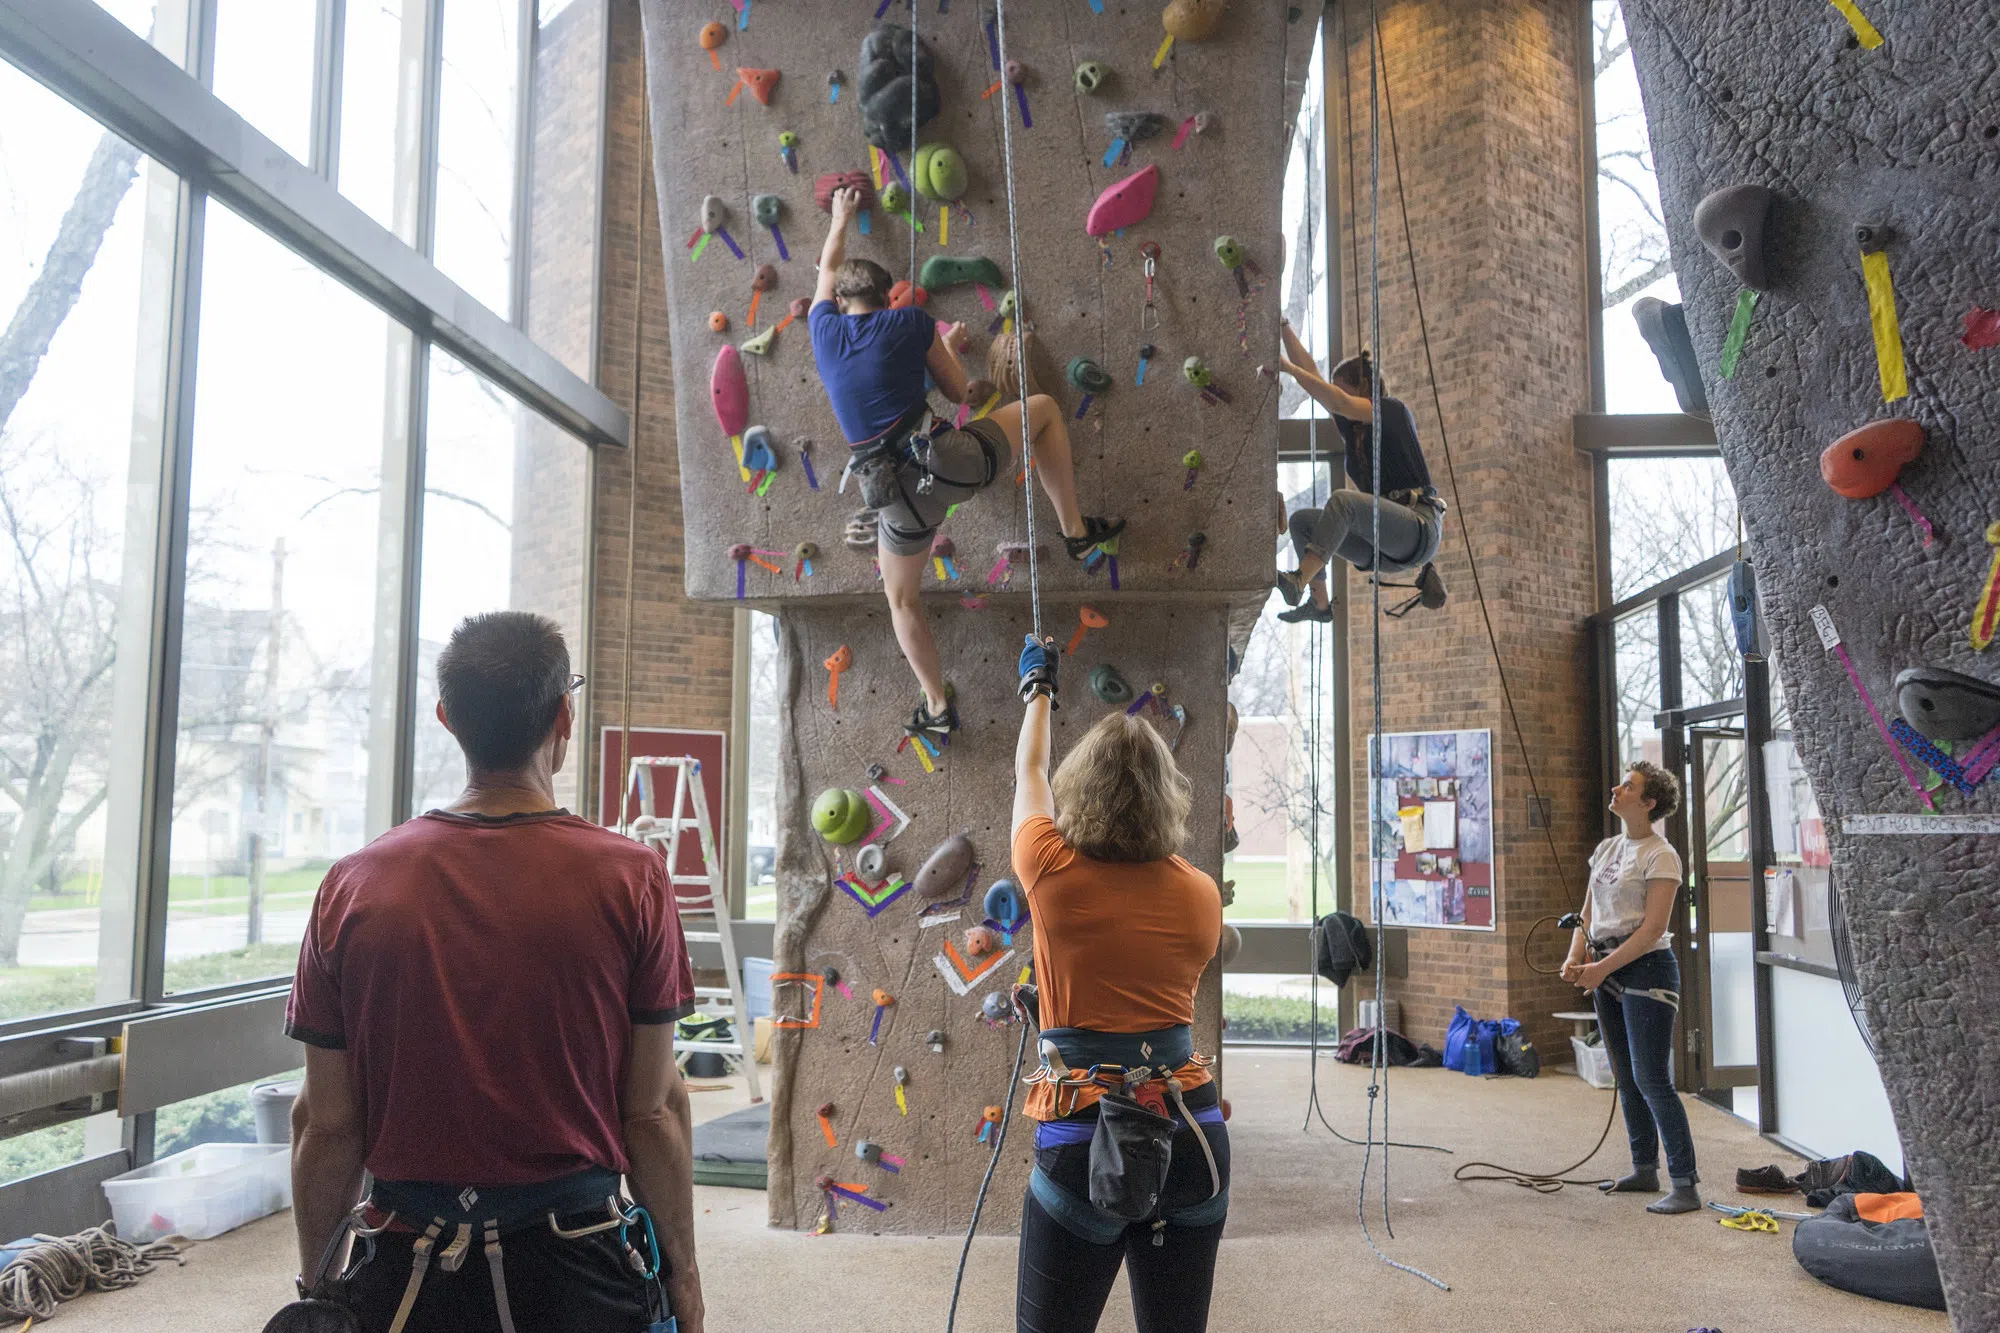 A few students climb on the colorful rock-climbing wall.